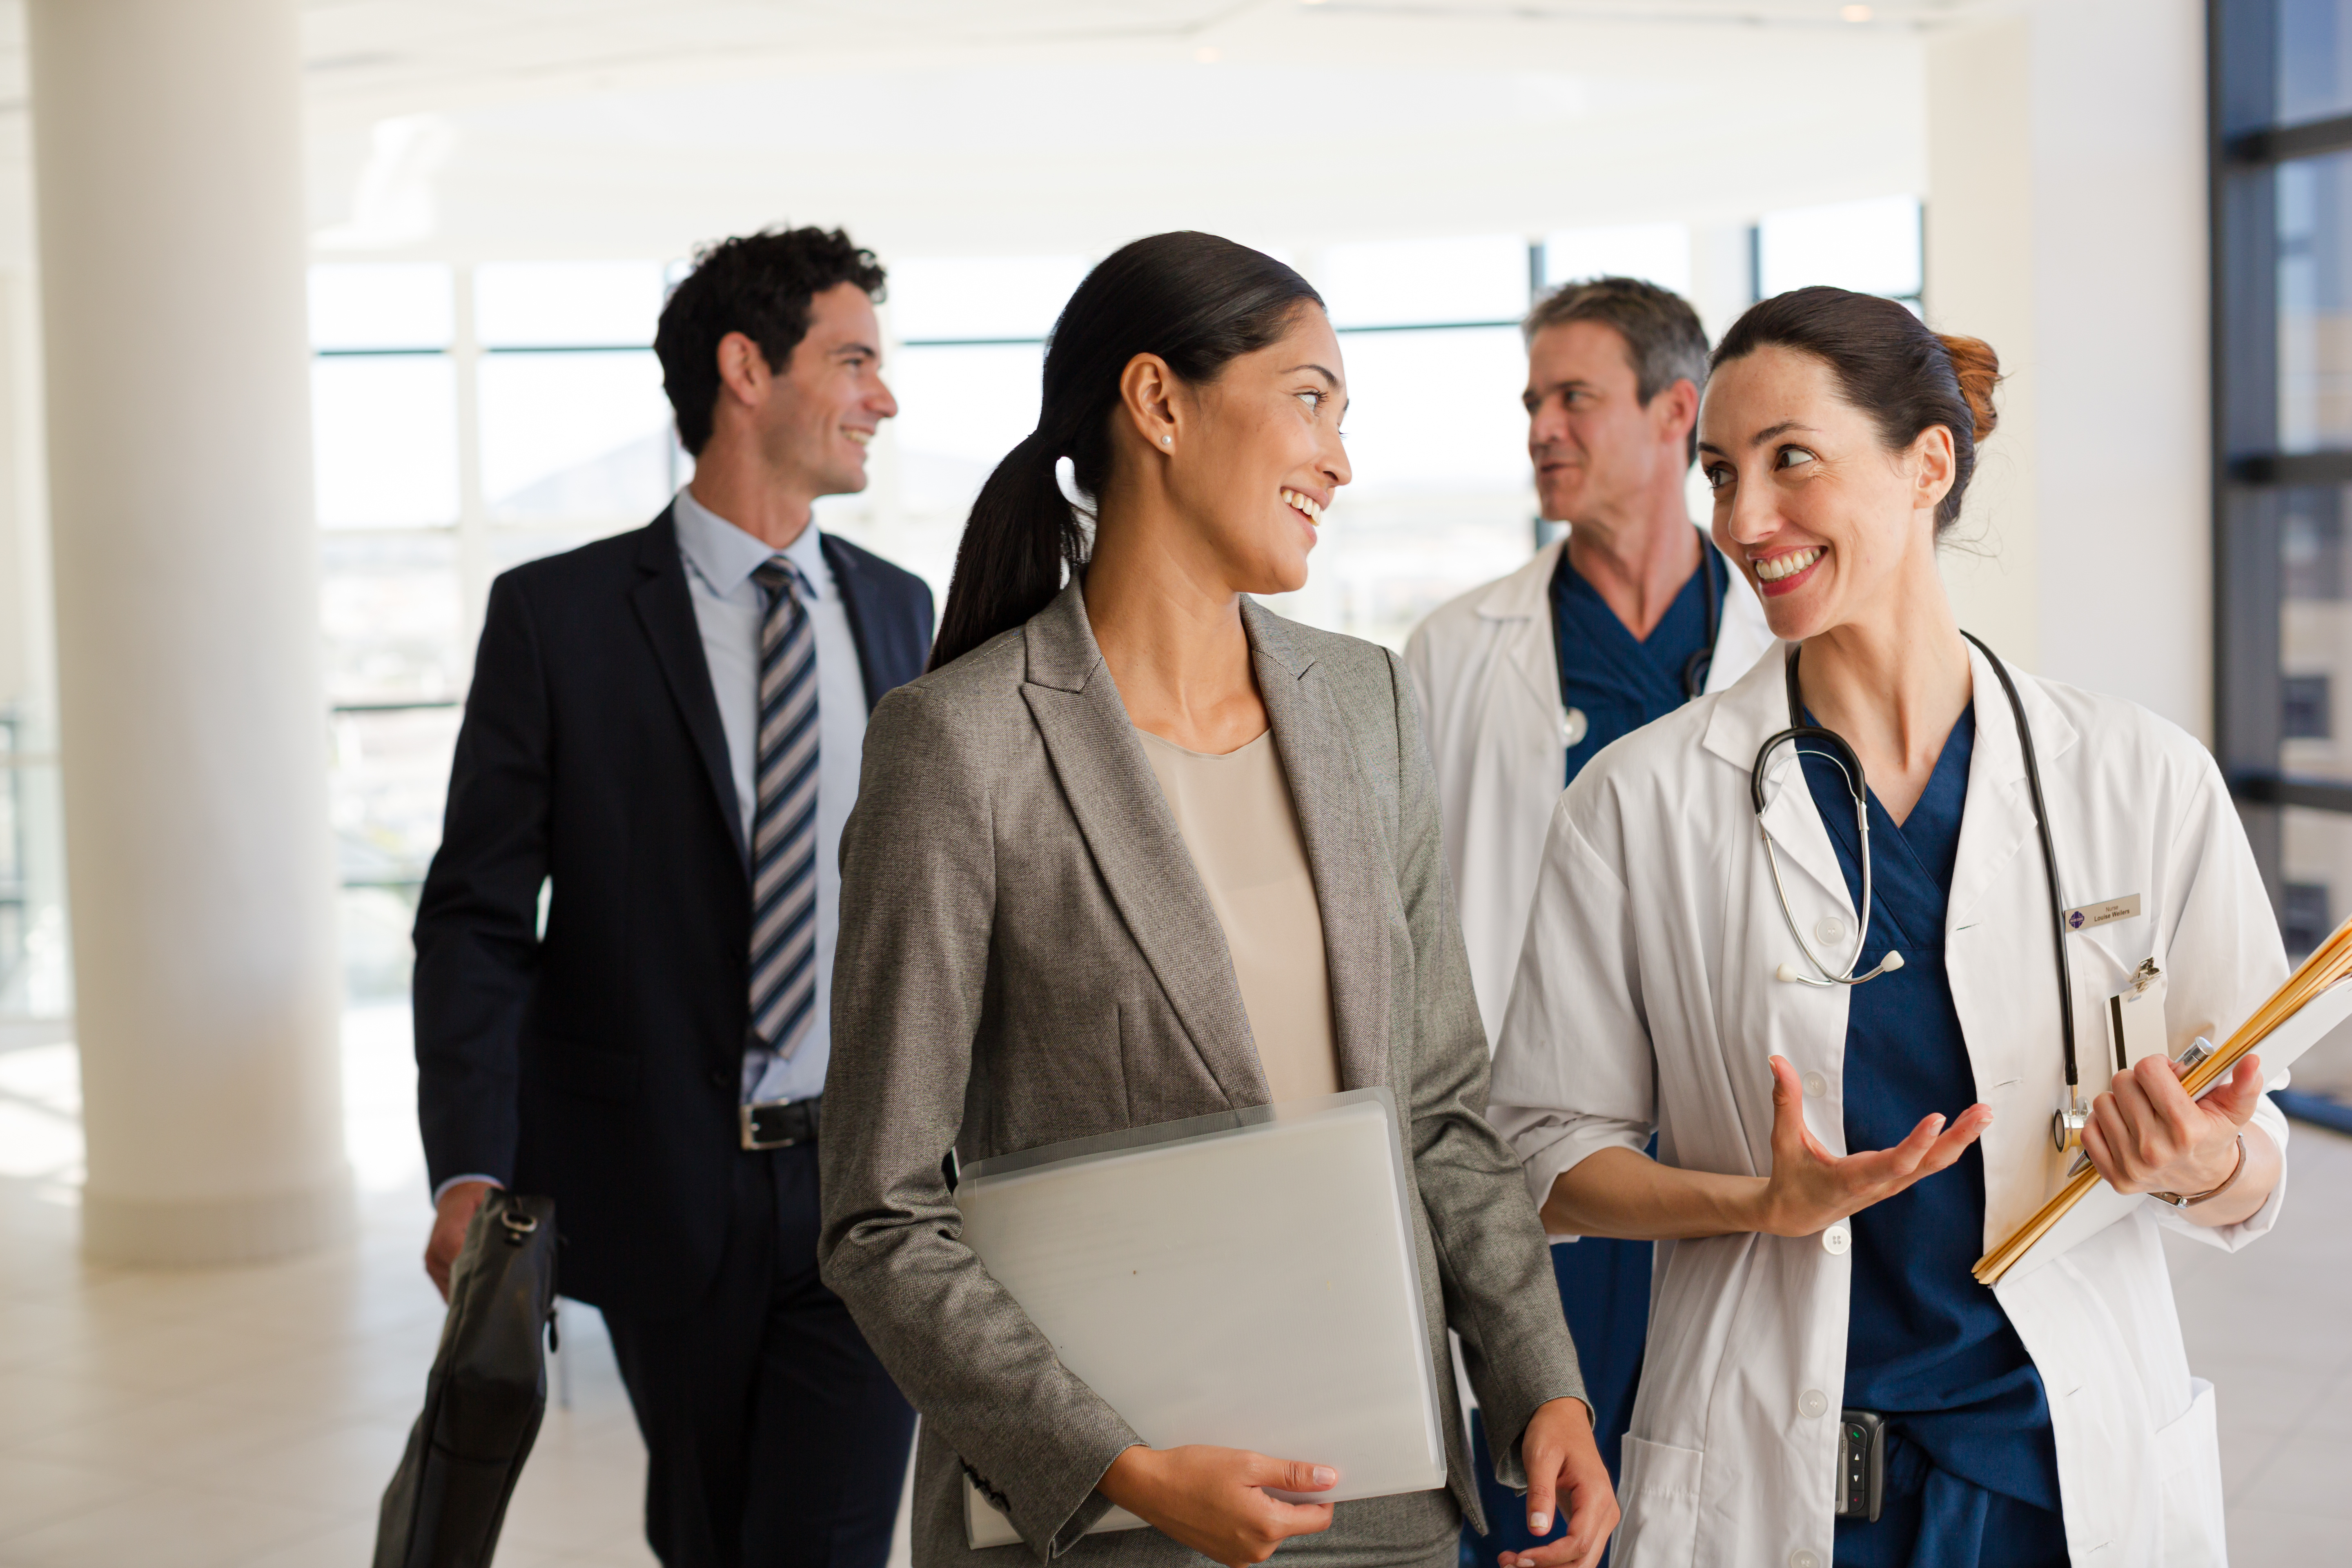 Winning Over Hospital Leadership: 4 Tips to Gain Executive Buy-In